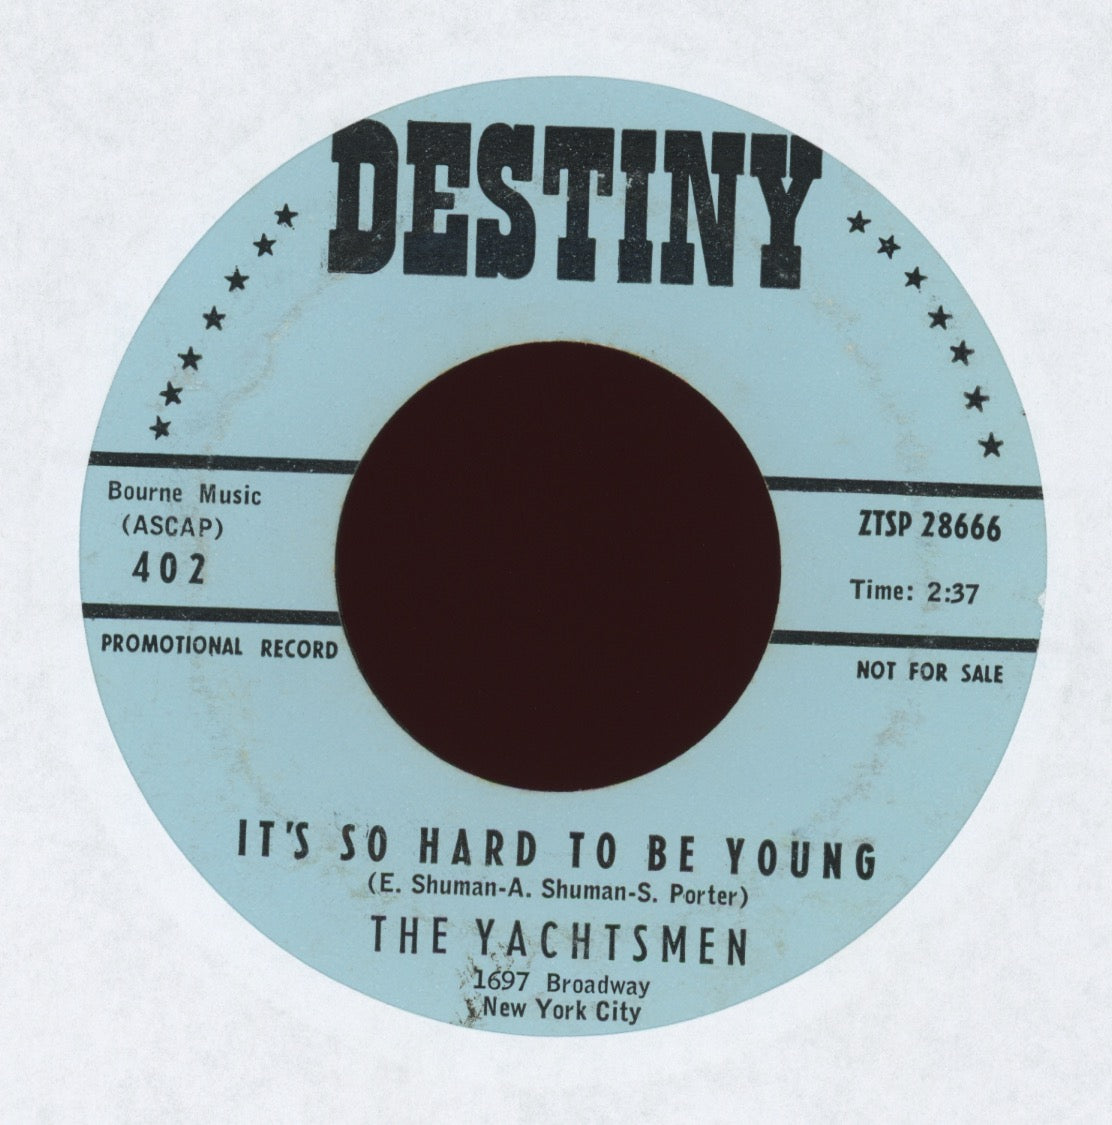 The Yachtsmen - It's So Hard To Be Young on Destiny